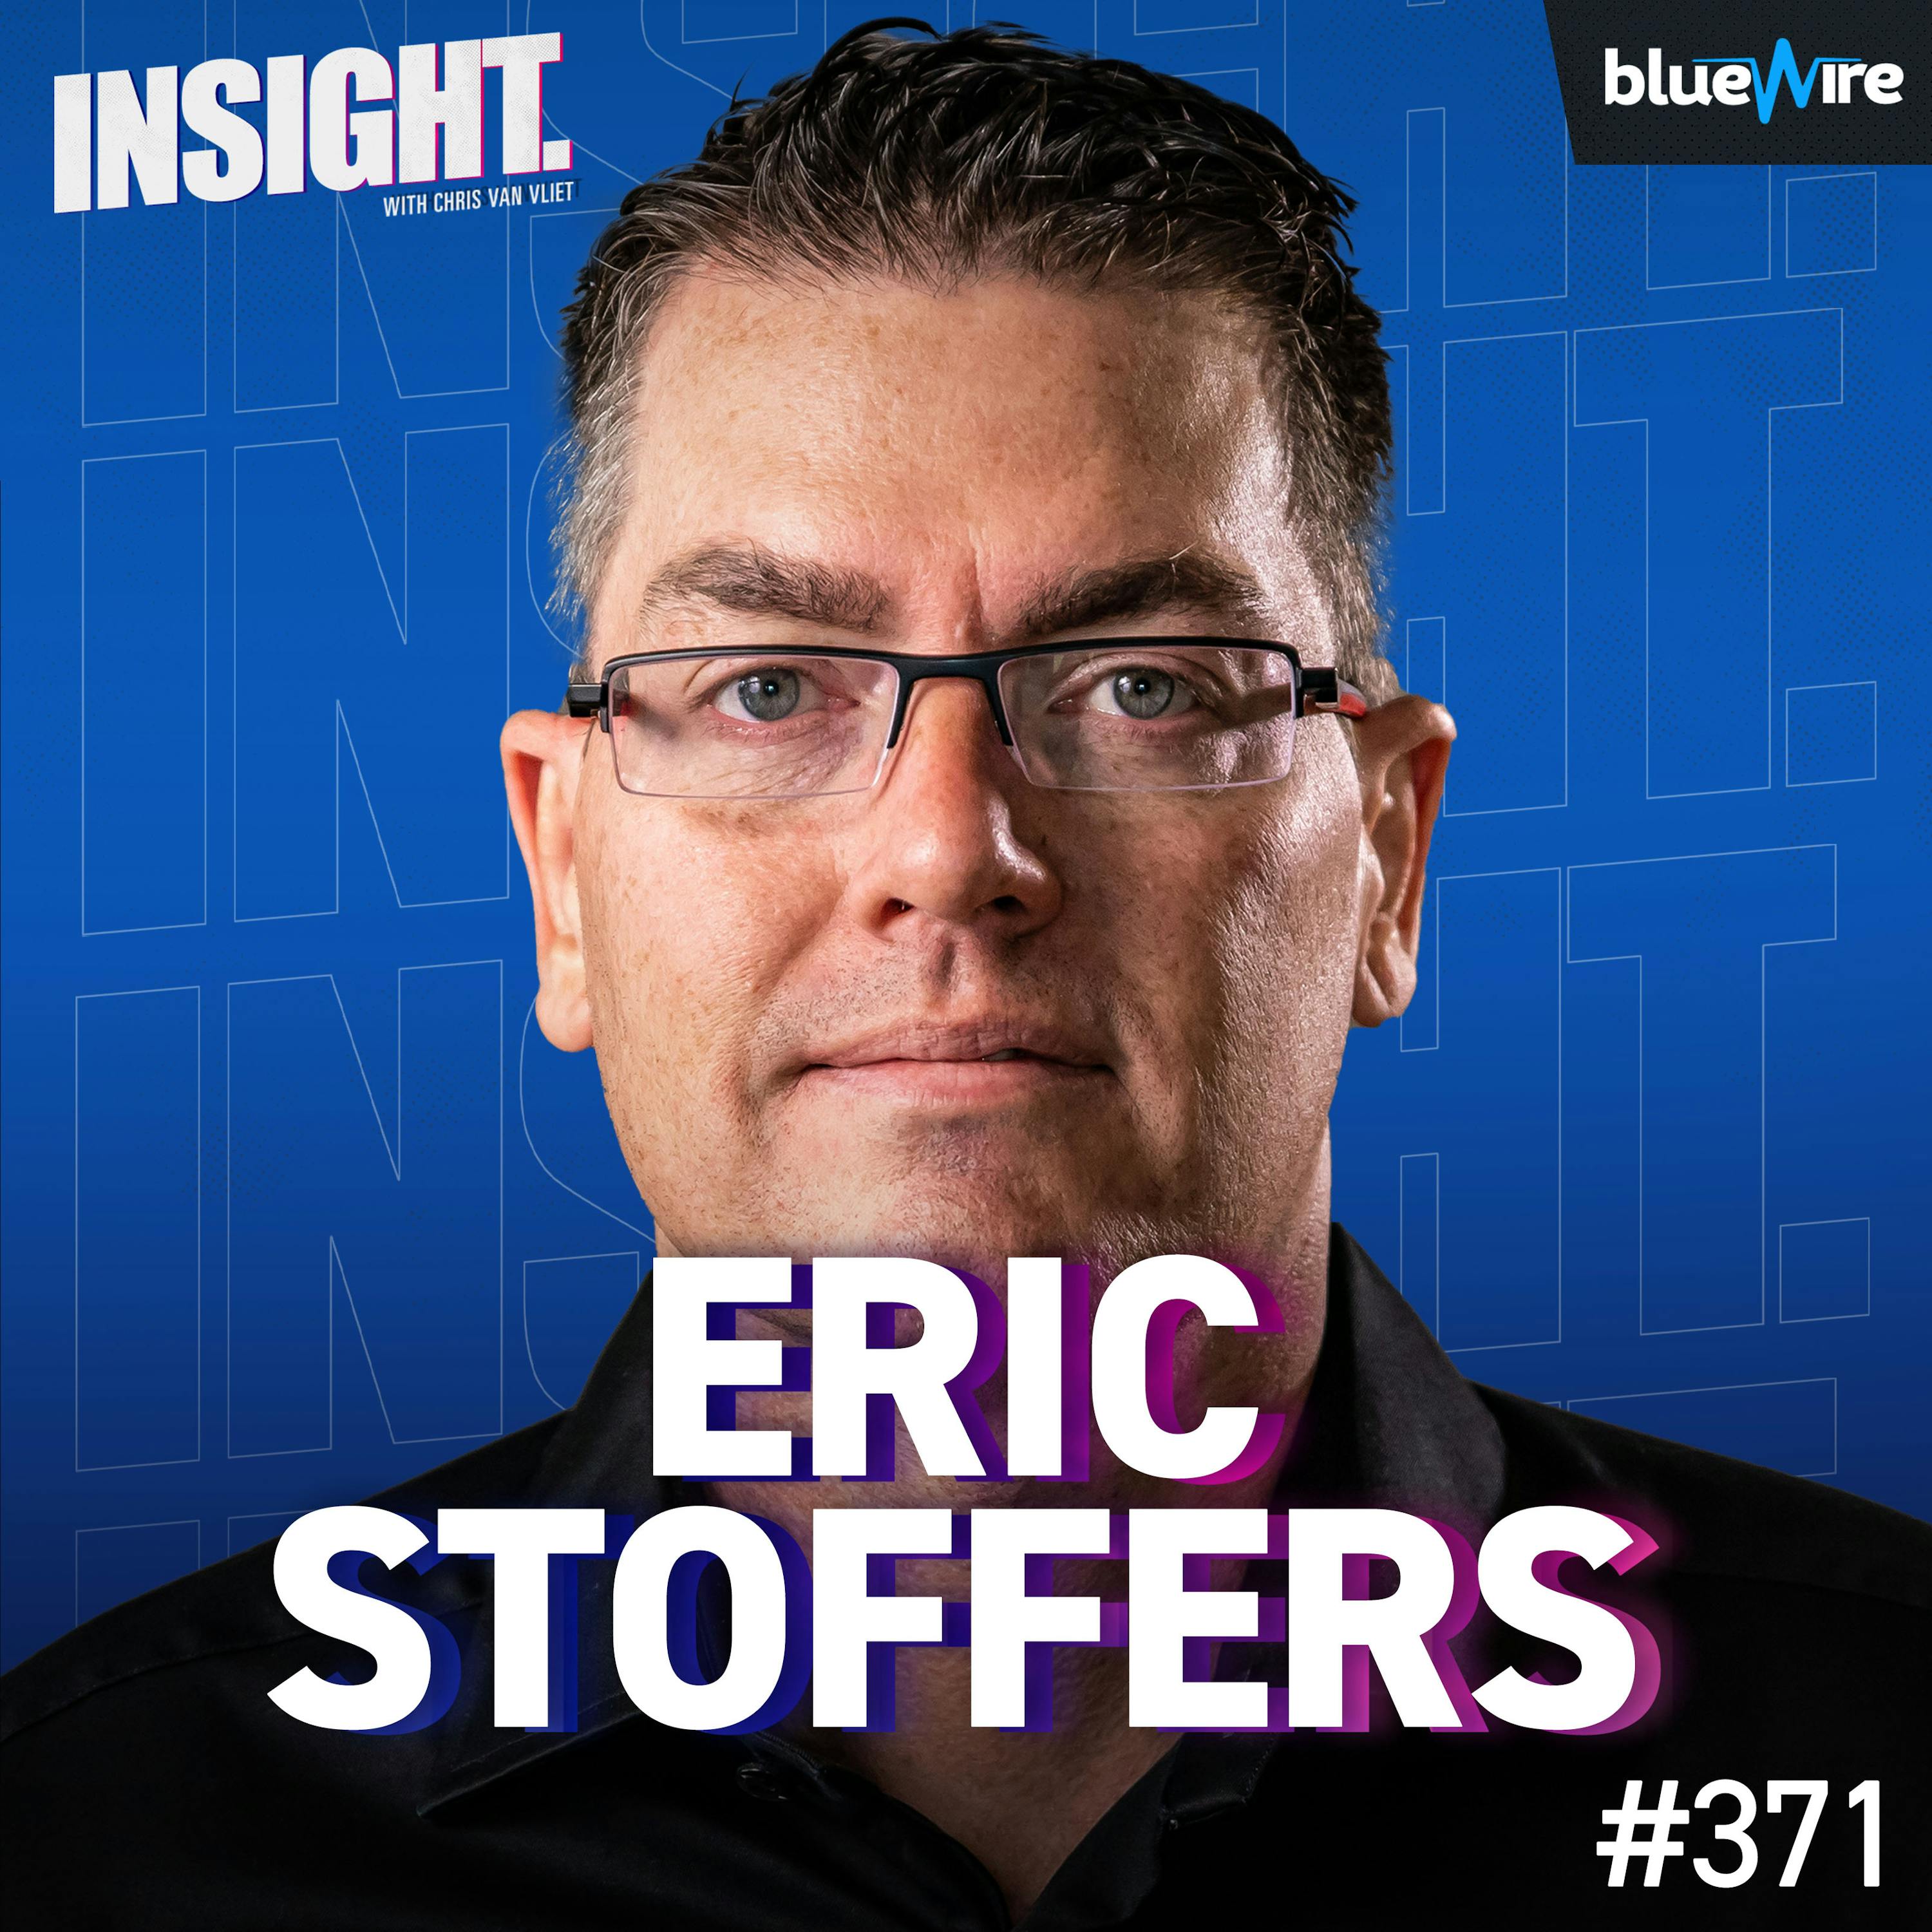 How Stem Cell Treatments Are Changing Wrestling And Sports With BioXcellerator CEO & Founder Eric Stoffers